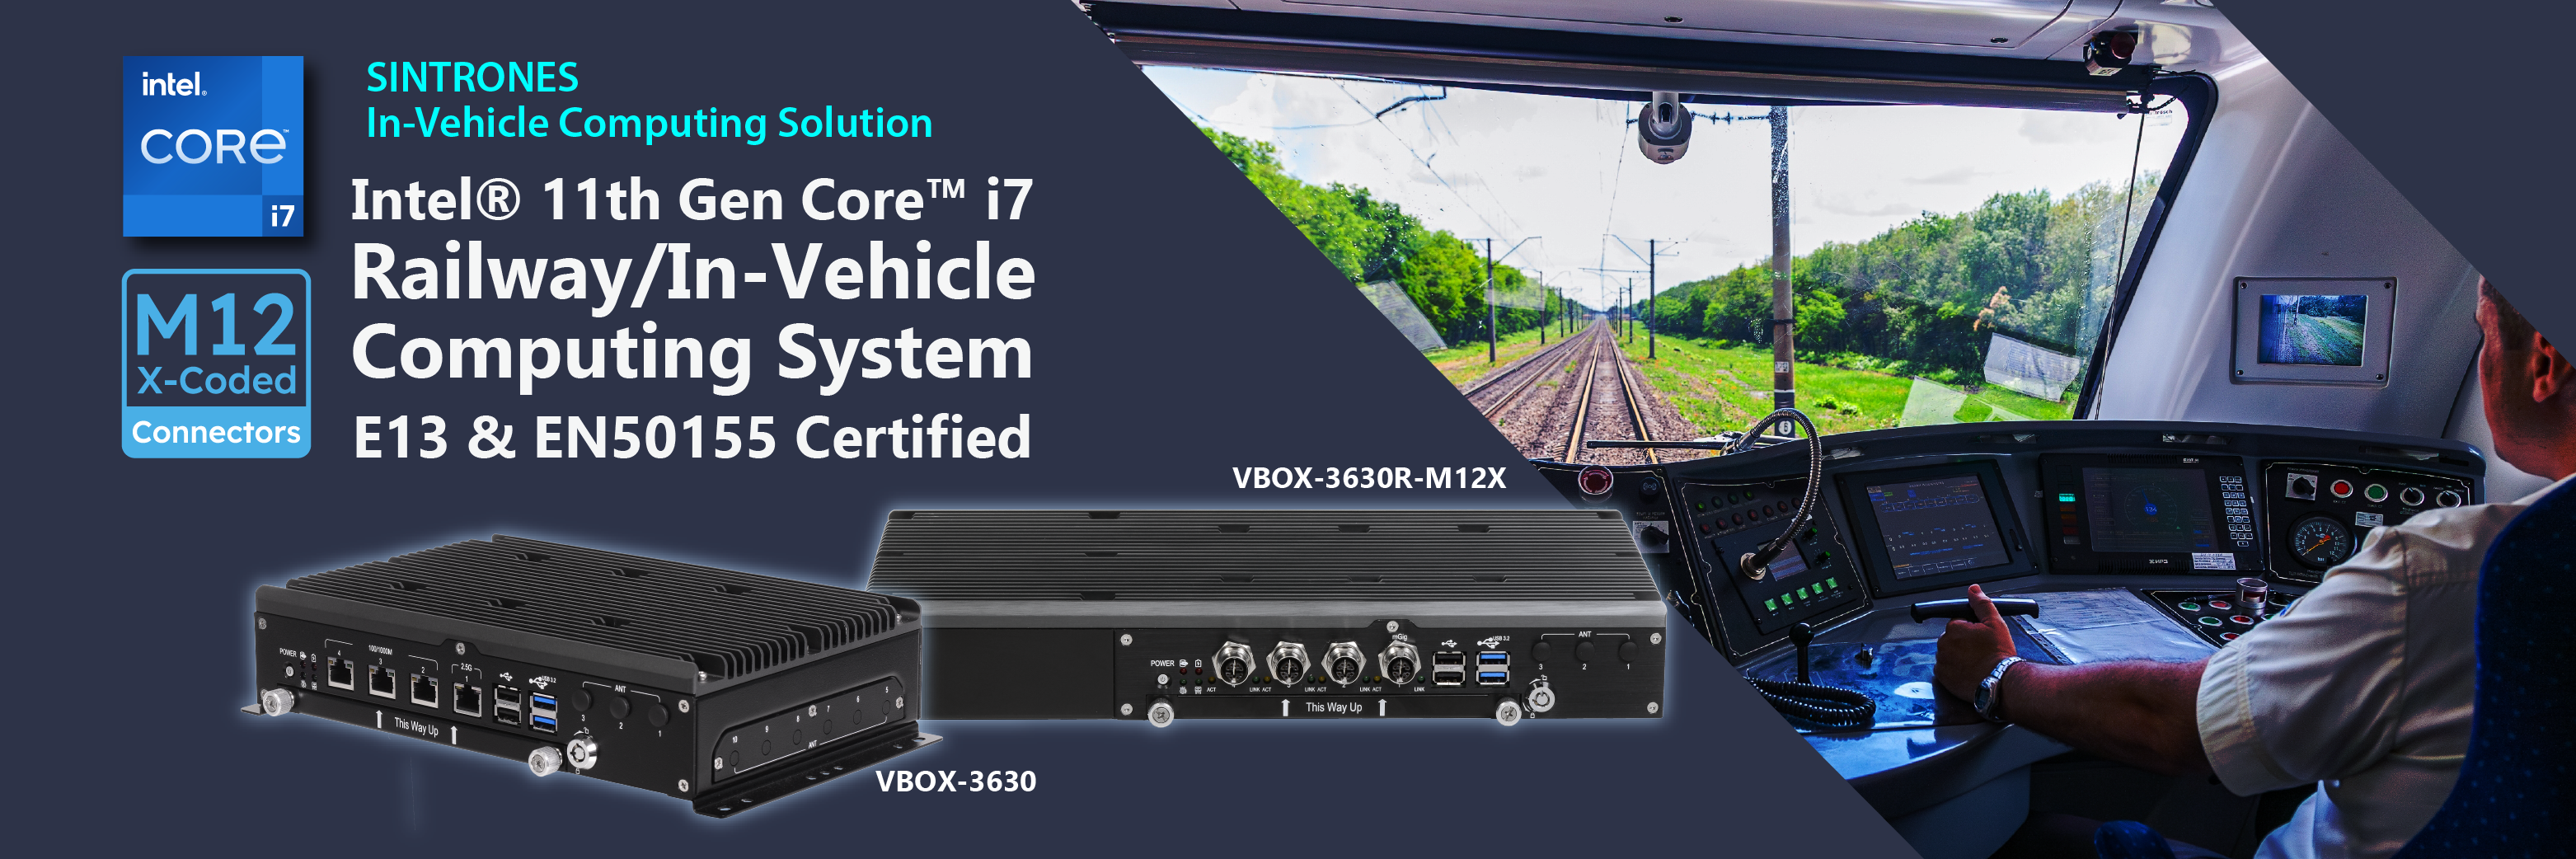 SINTRONES Introduces the VBOX-3630 Series: A Revolutionary Fanless In-Vehicle Computer with 5G Connectivity